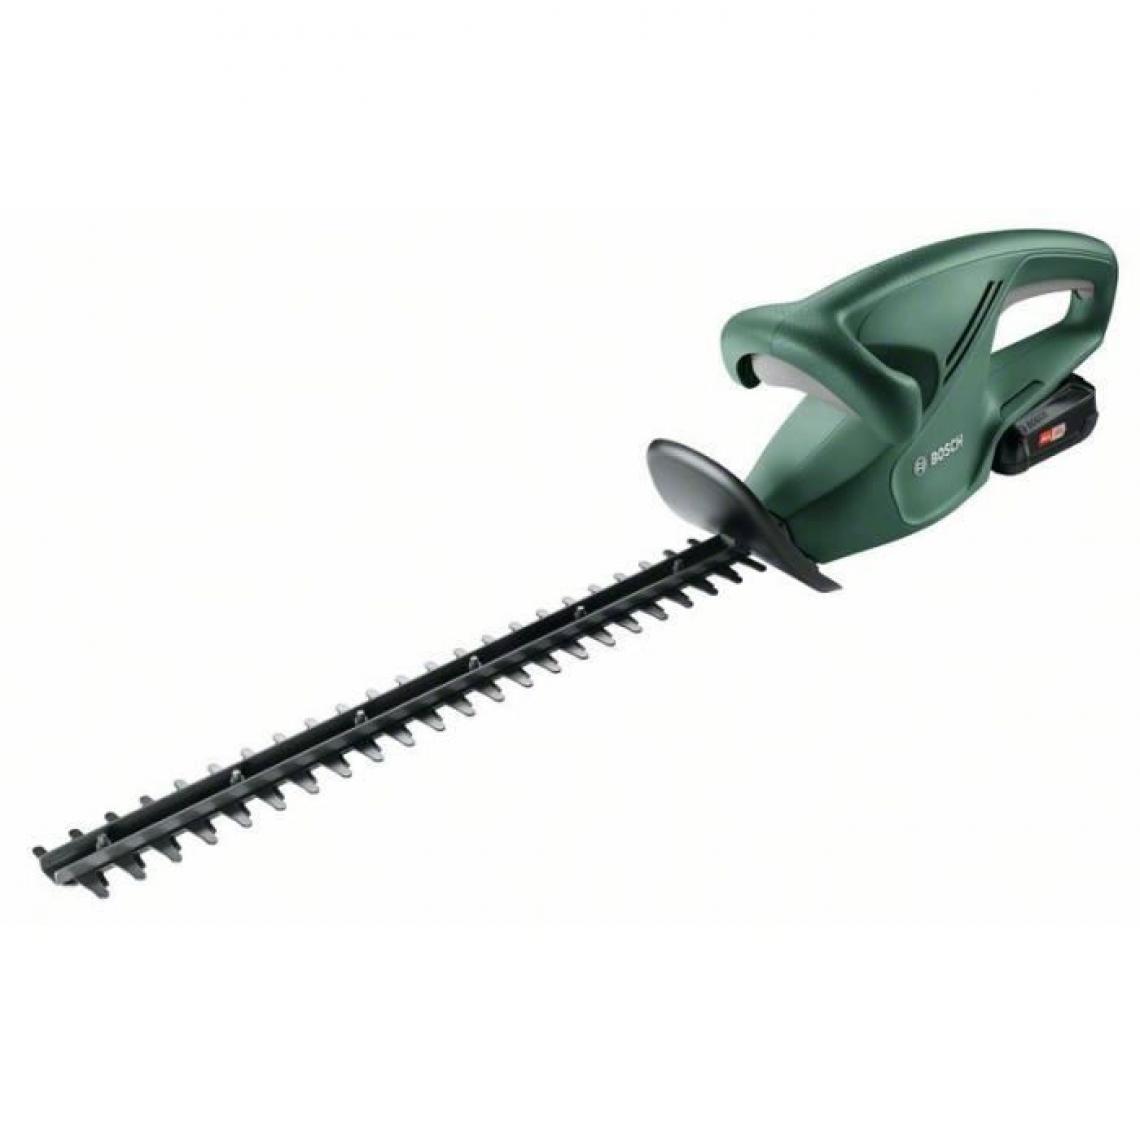 Bosch - Taille-haies Easy HedgeCut 18-45 BOSCH - 0600849H01  - Taille-haies